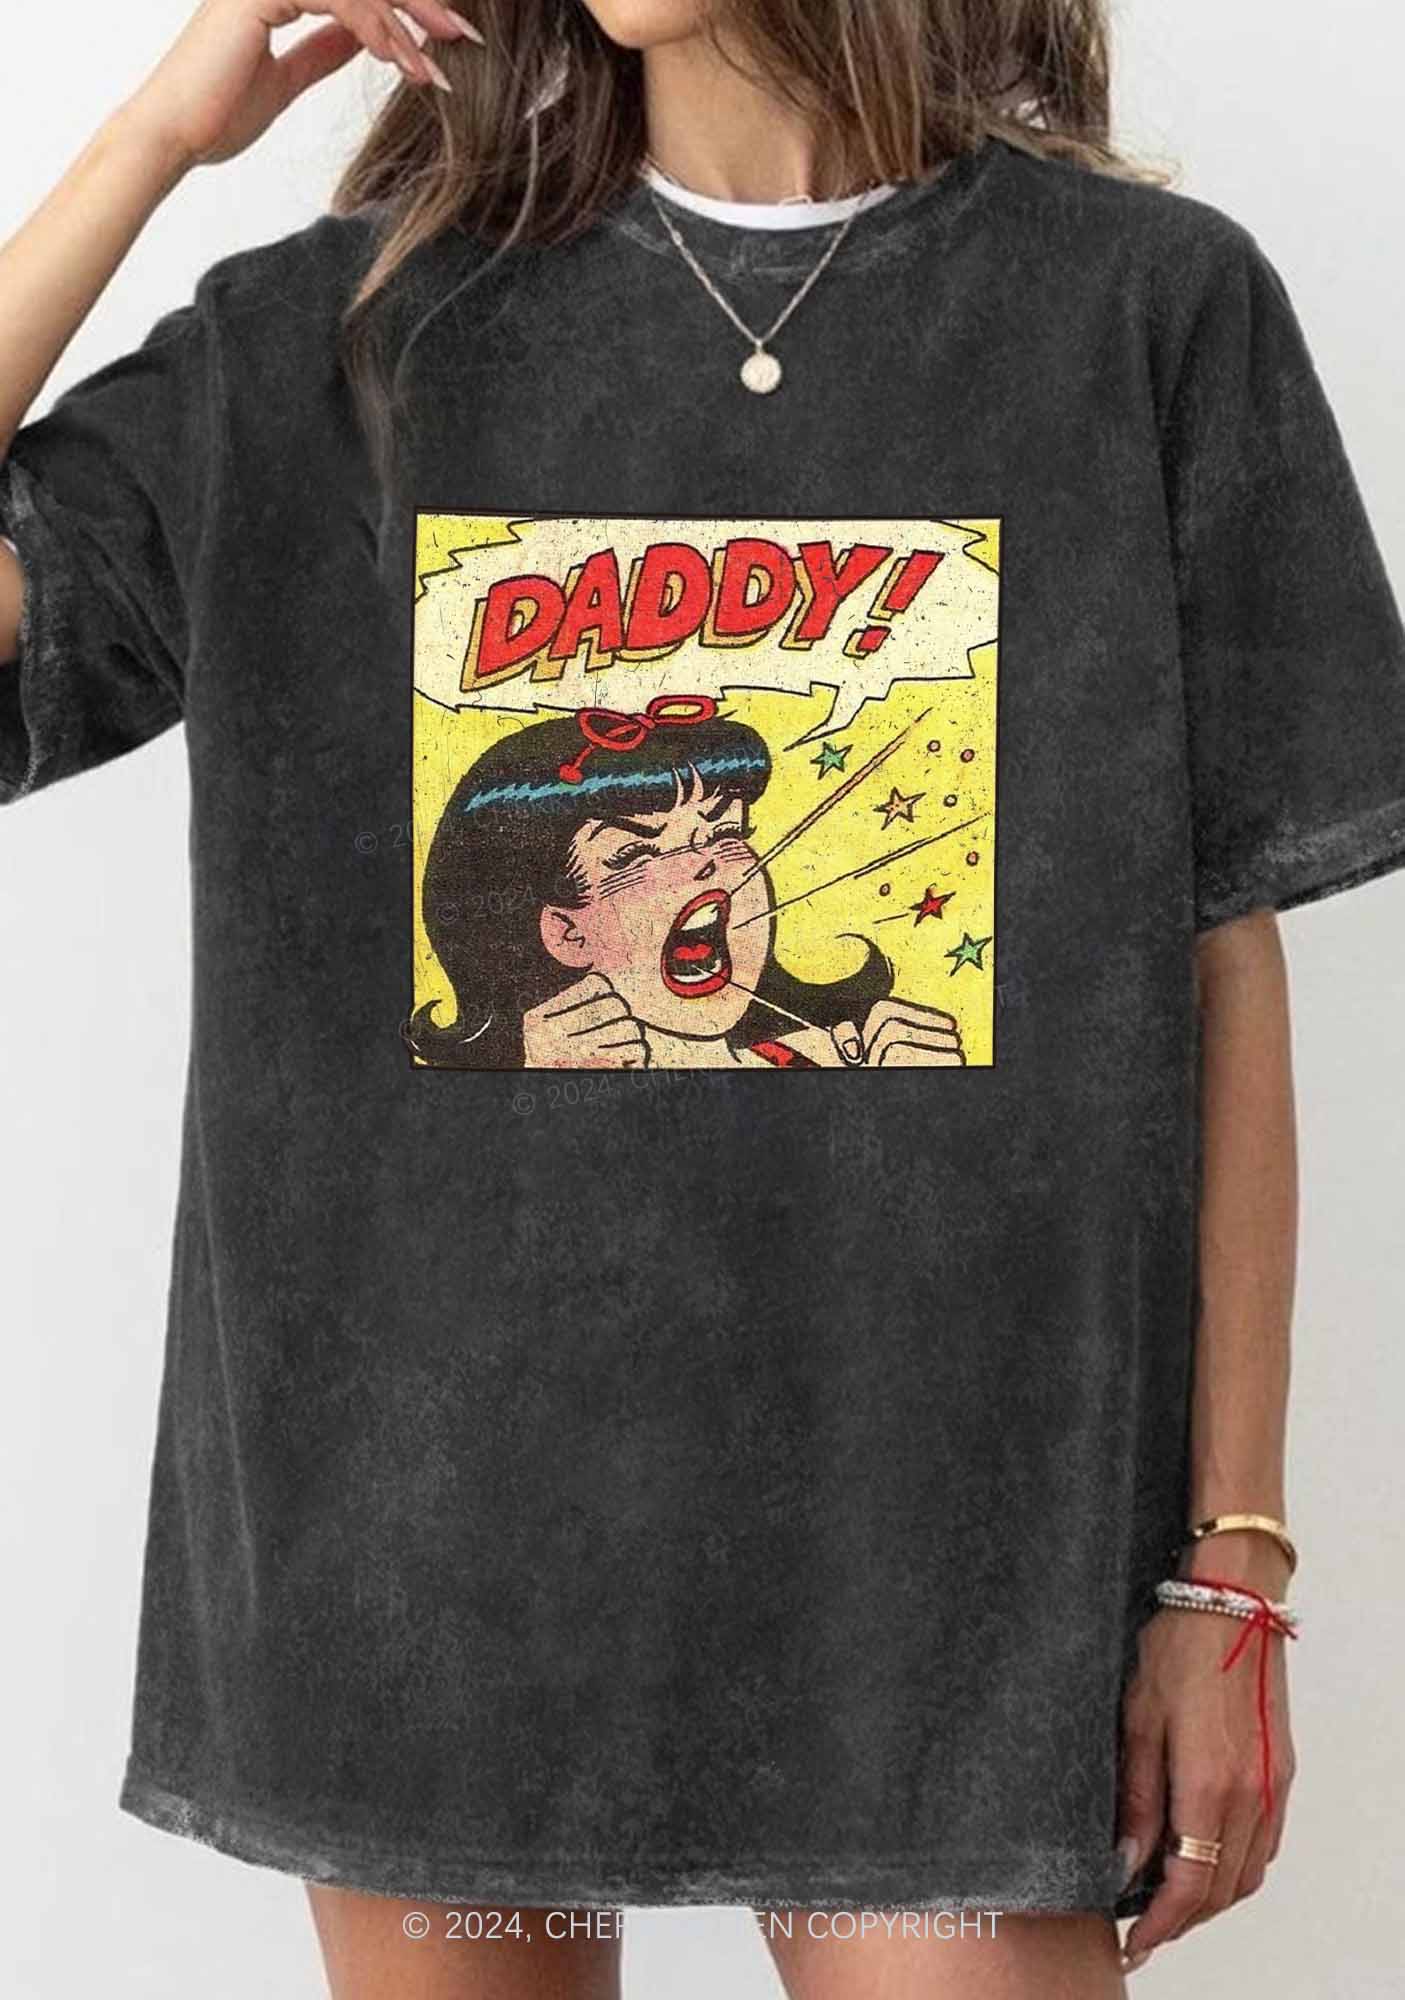 Call For Daddy Y2K Washed Tee Cherrykitten